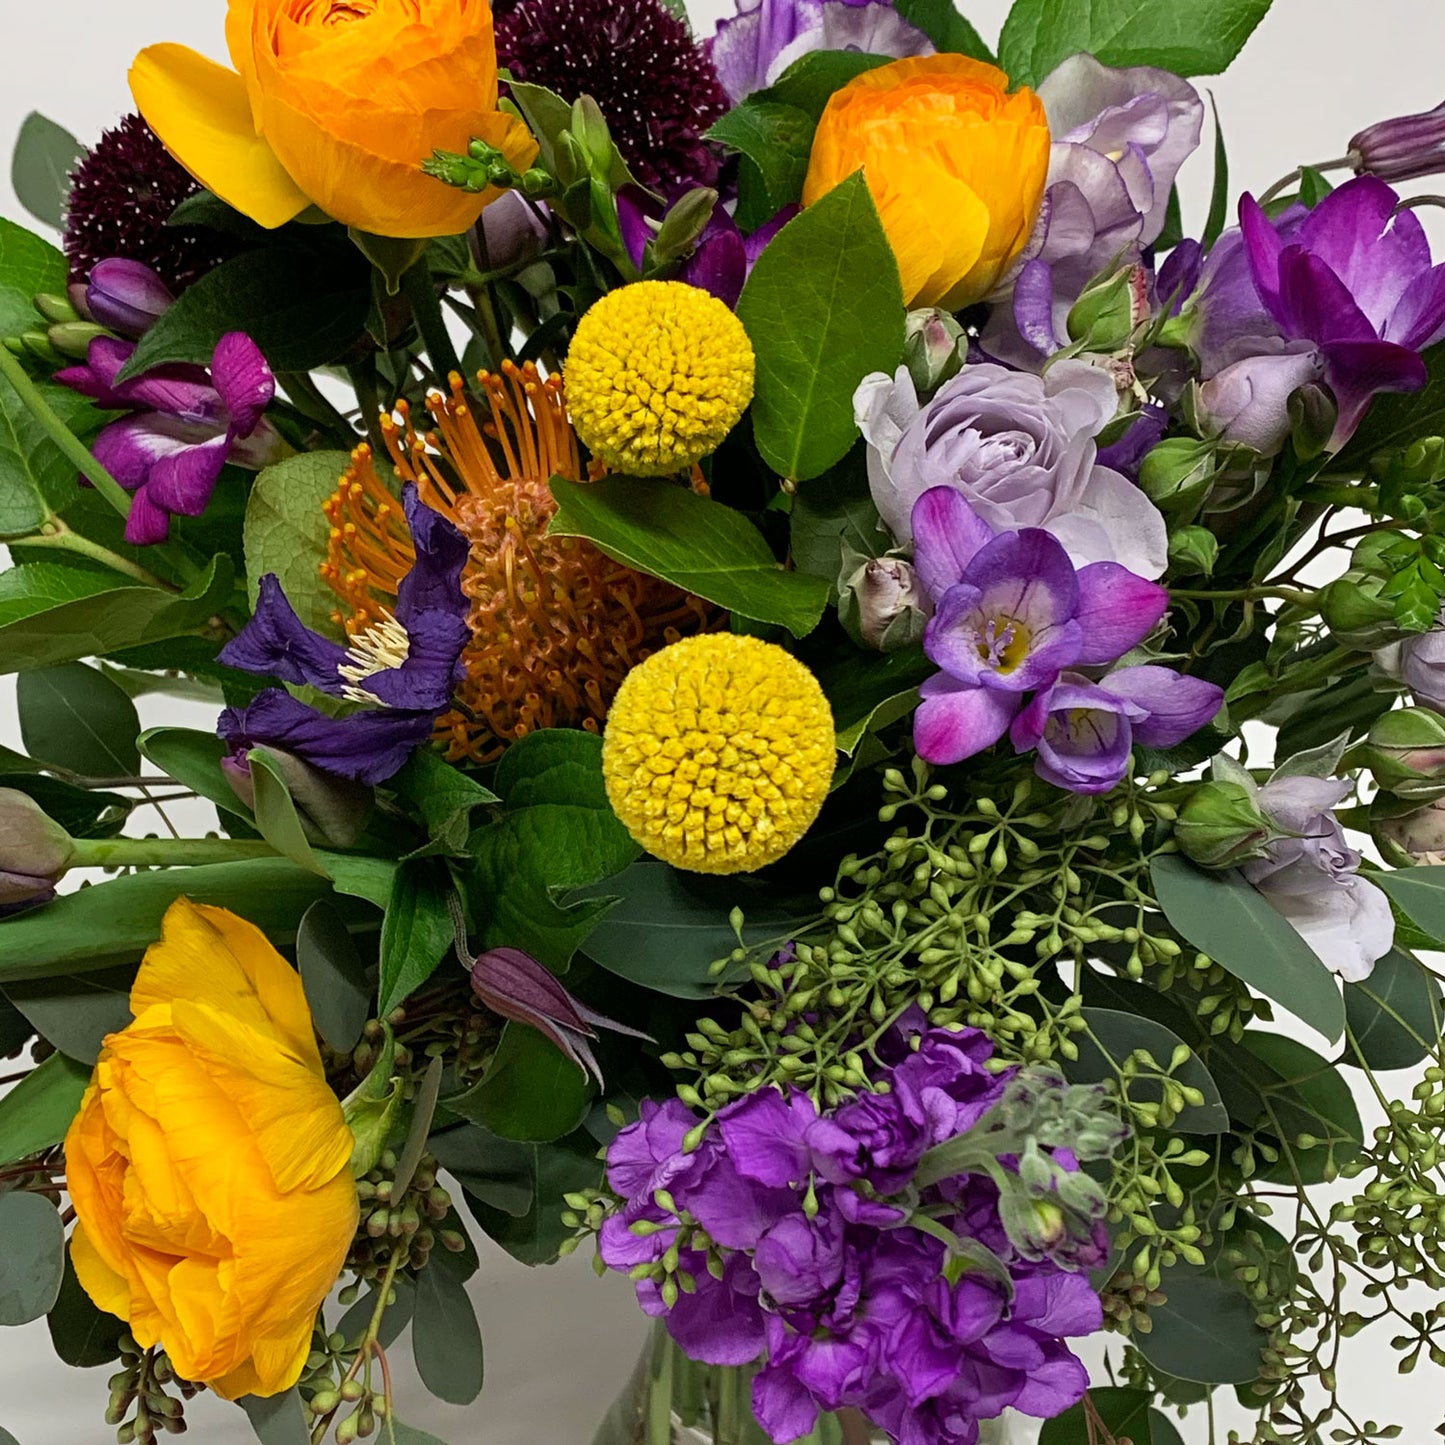 Close-up image of a dynamic bouquet starting with yellows, deepening to purple and mauve, with a touch of acid orange for energy. Order online for same-day flower delivery from Toronto's best florist, available near you.